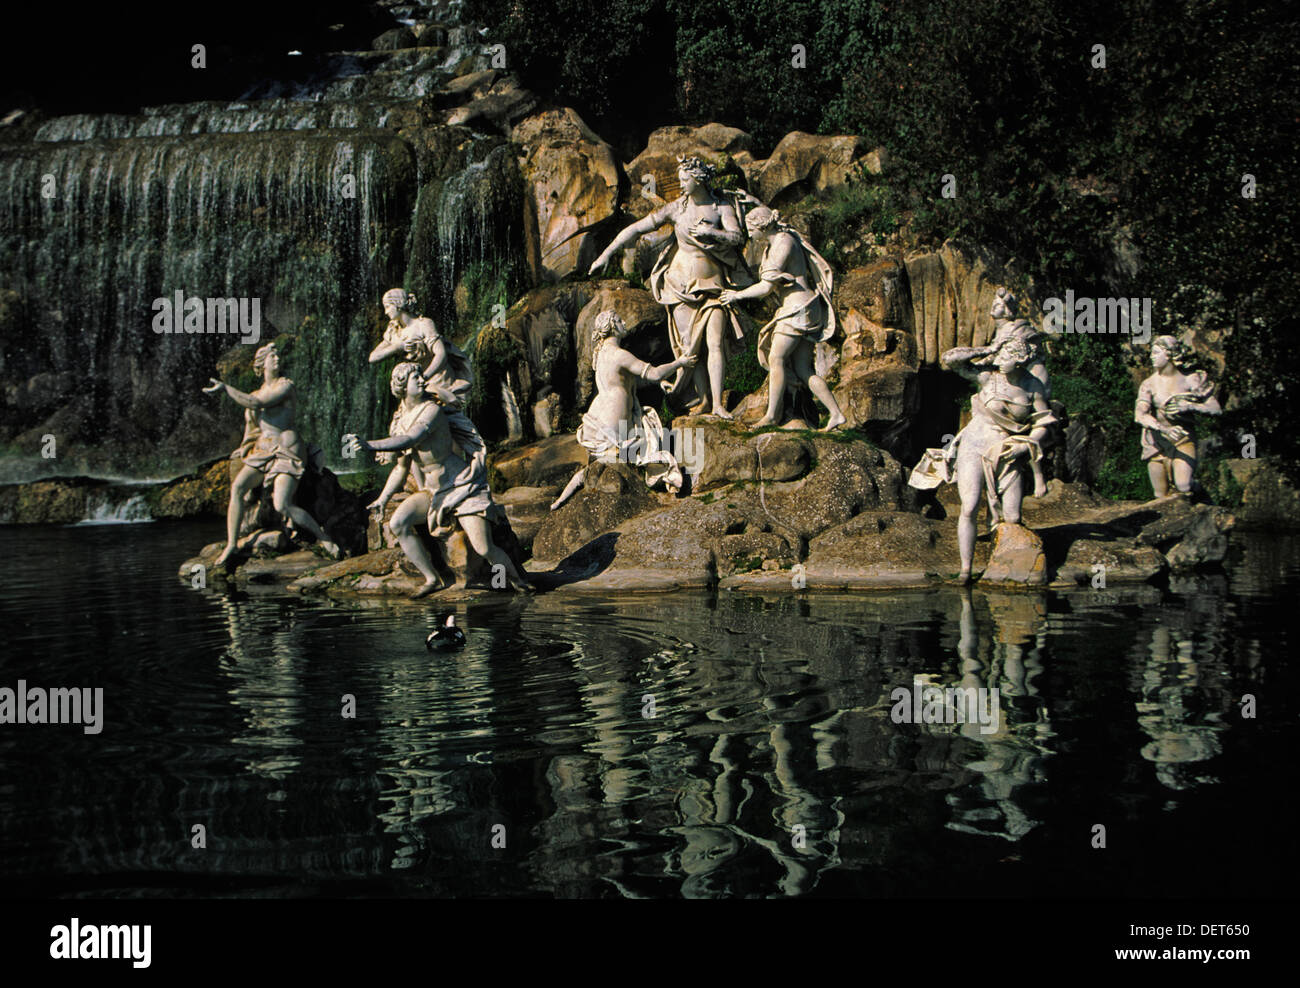 Fountain of Diana and Actaeon in the park of the Royal Palace at Caserta (sculpture by Paolo Persico, Brunelli, Pietro Solari) Stock Photo